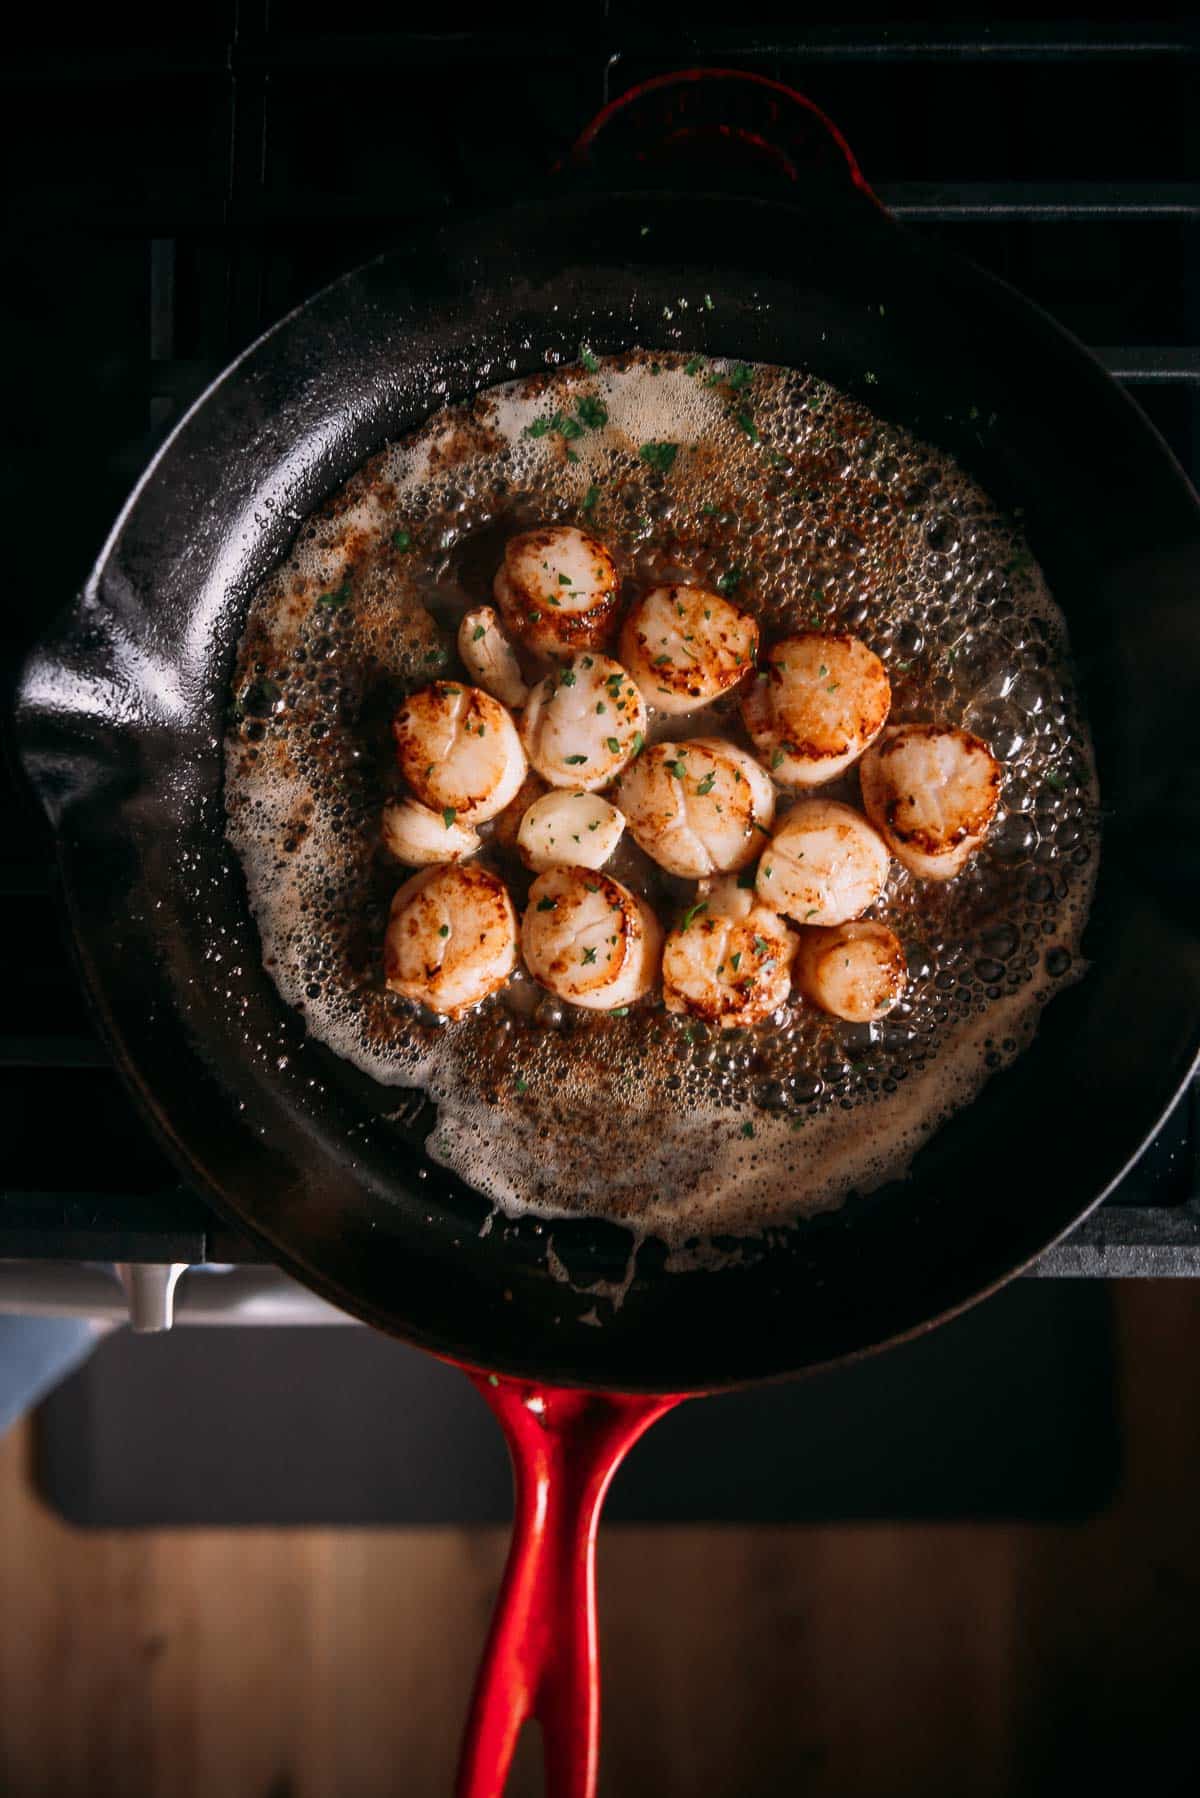 Scallops being seared in a skillet on the stove.